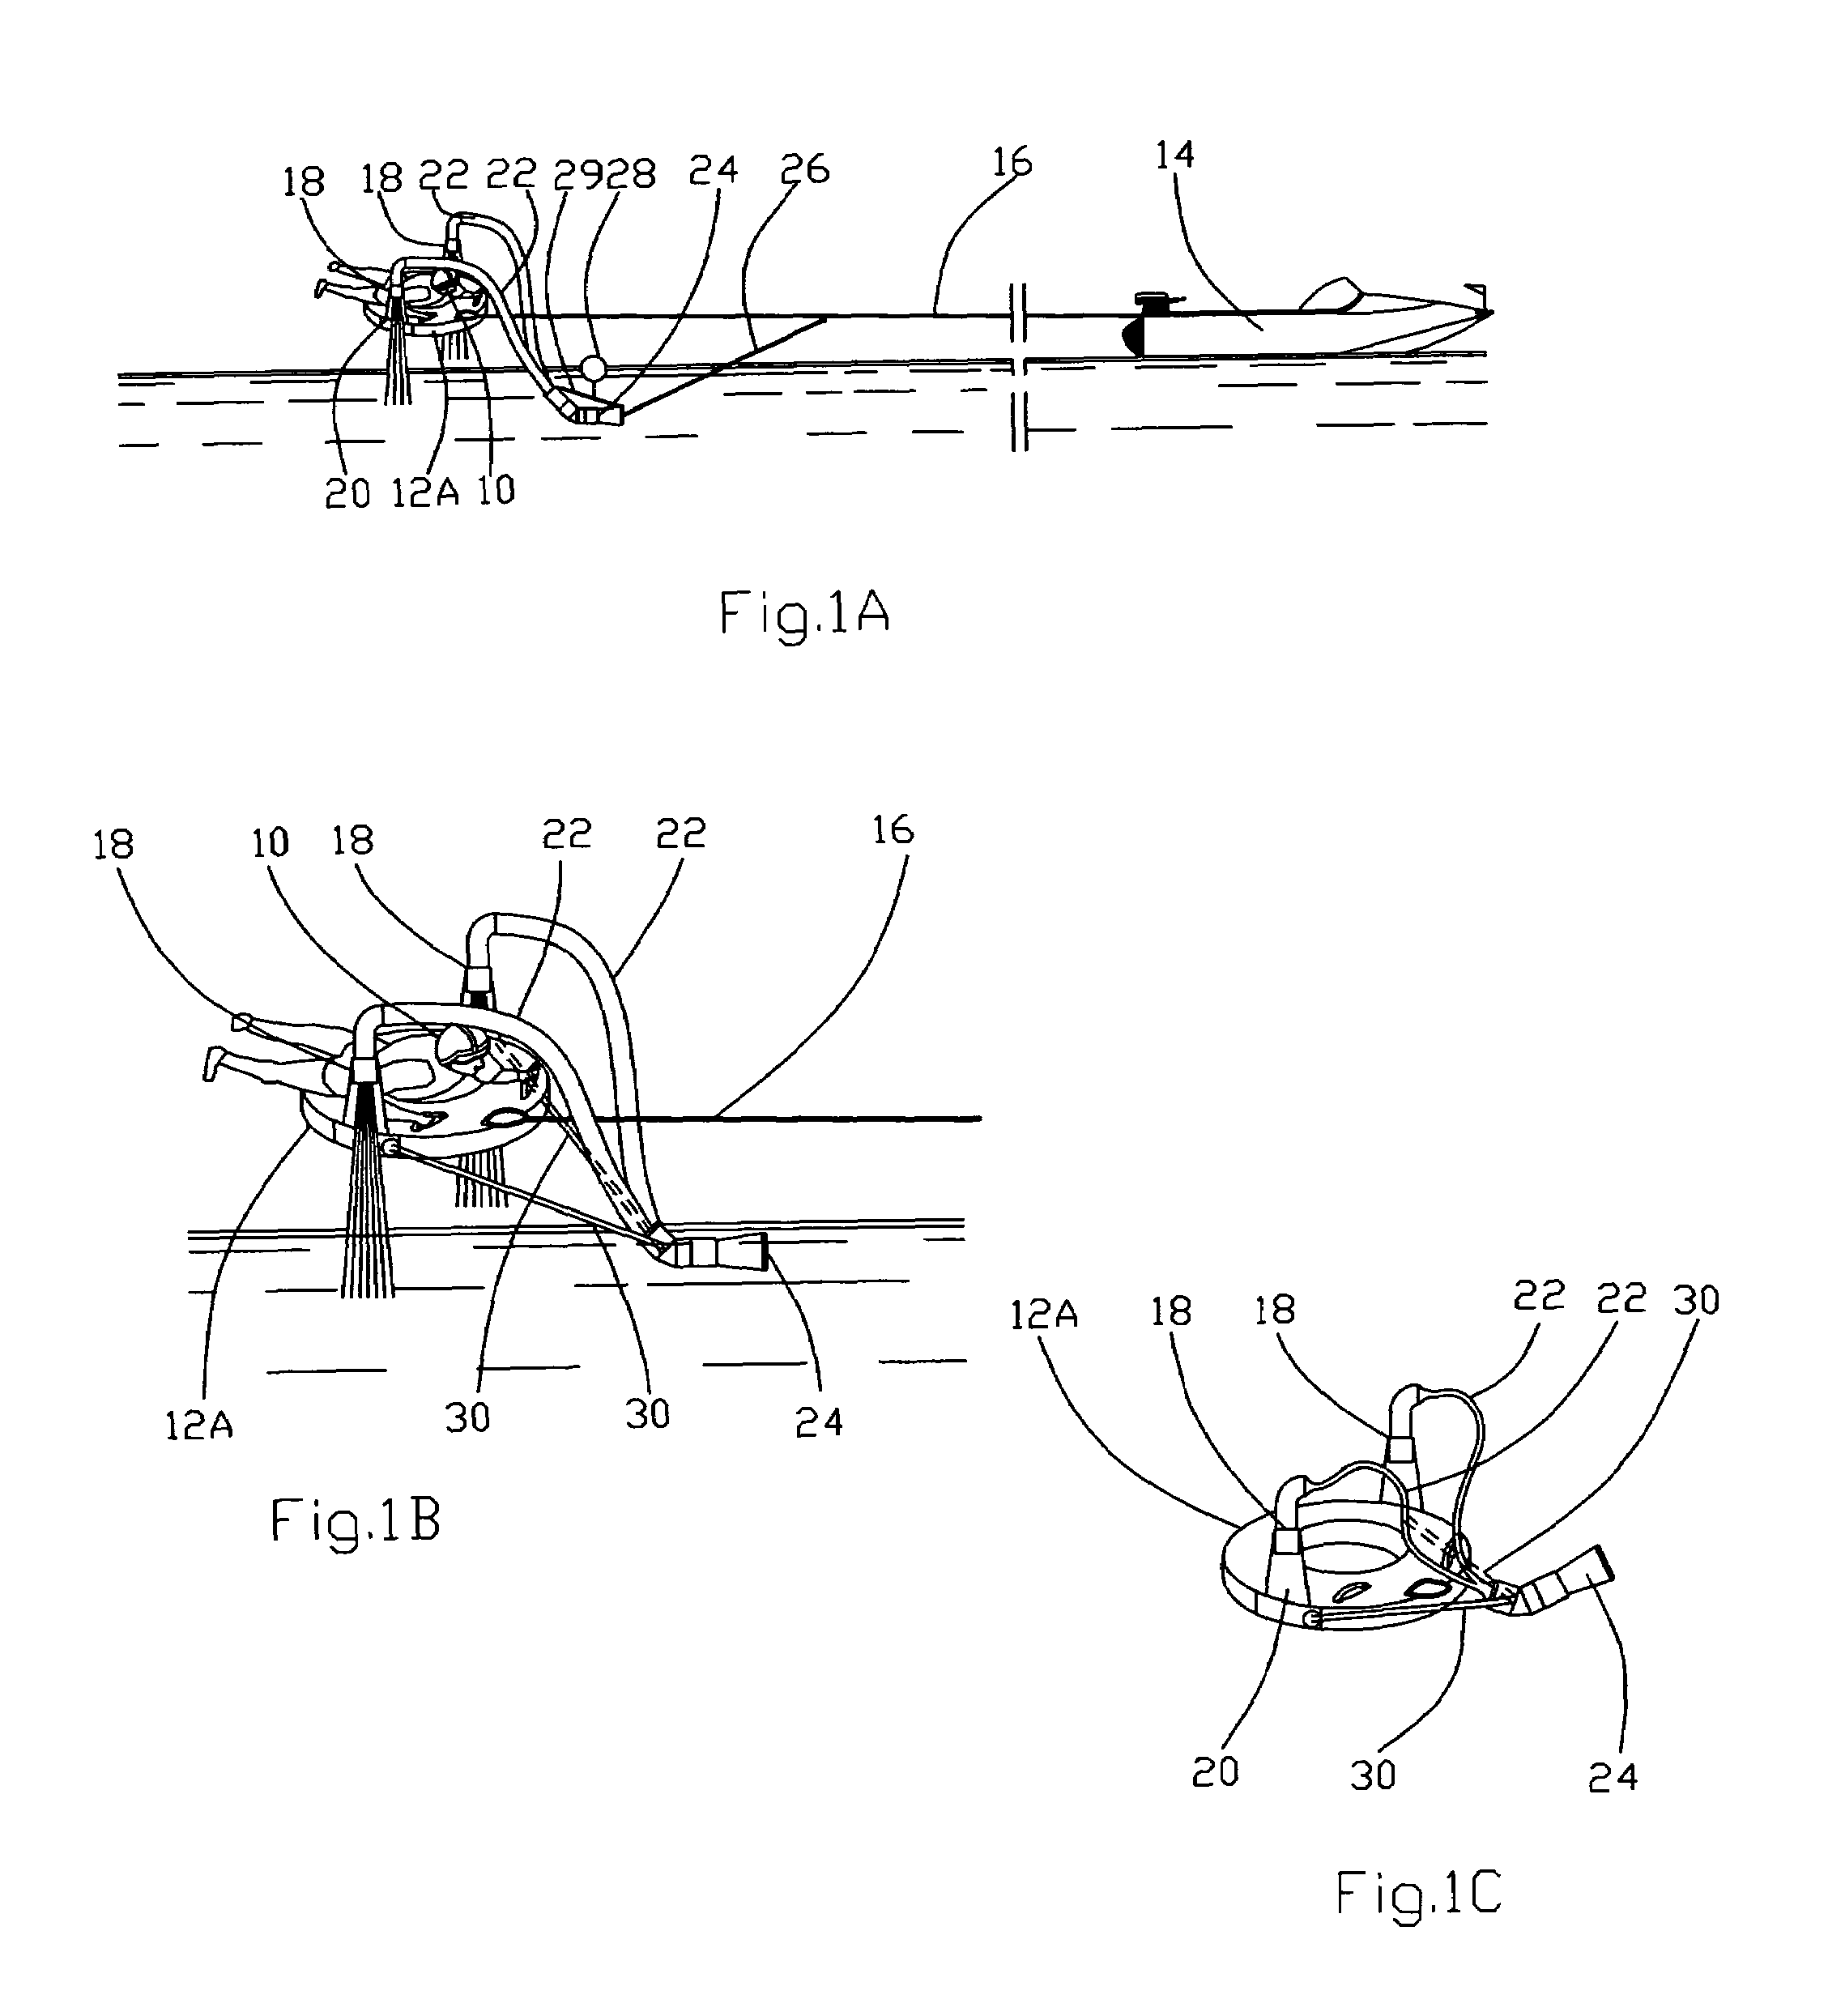 Personal flying water jet apparatus